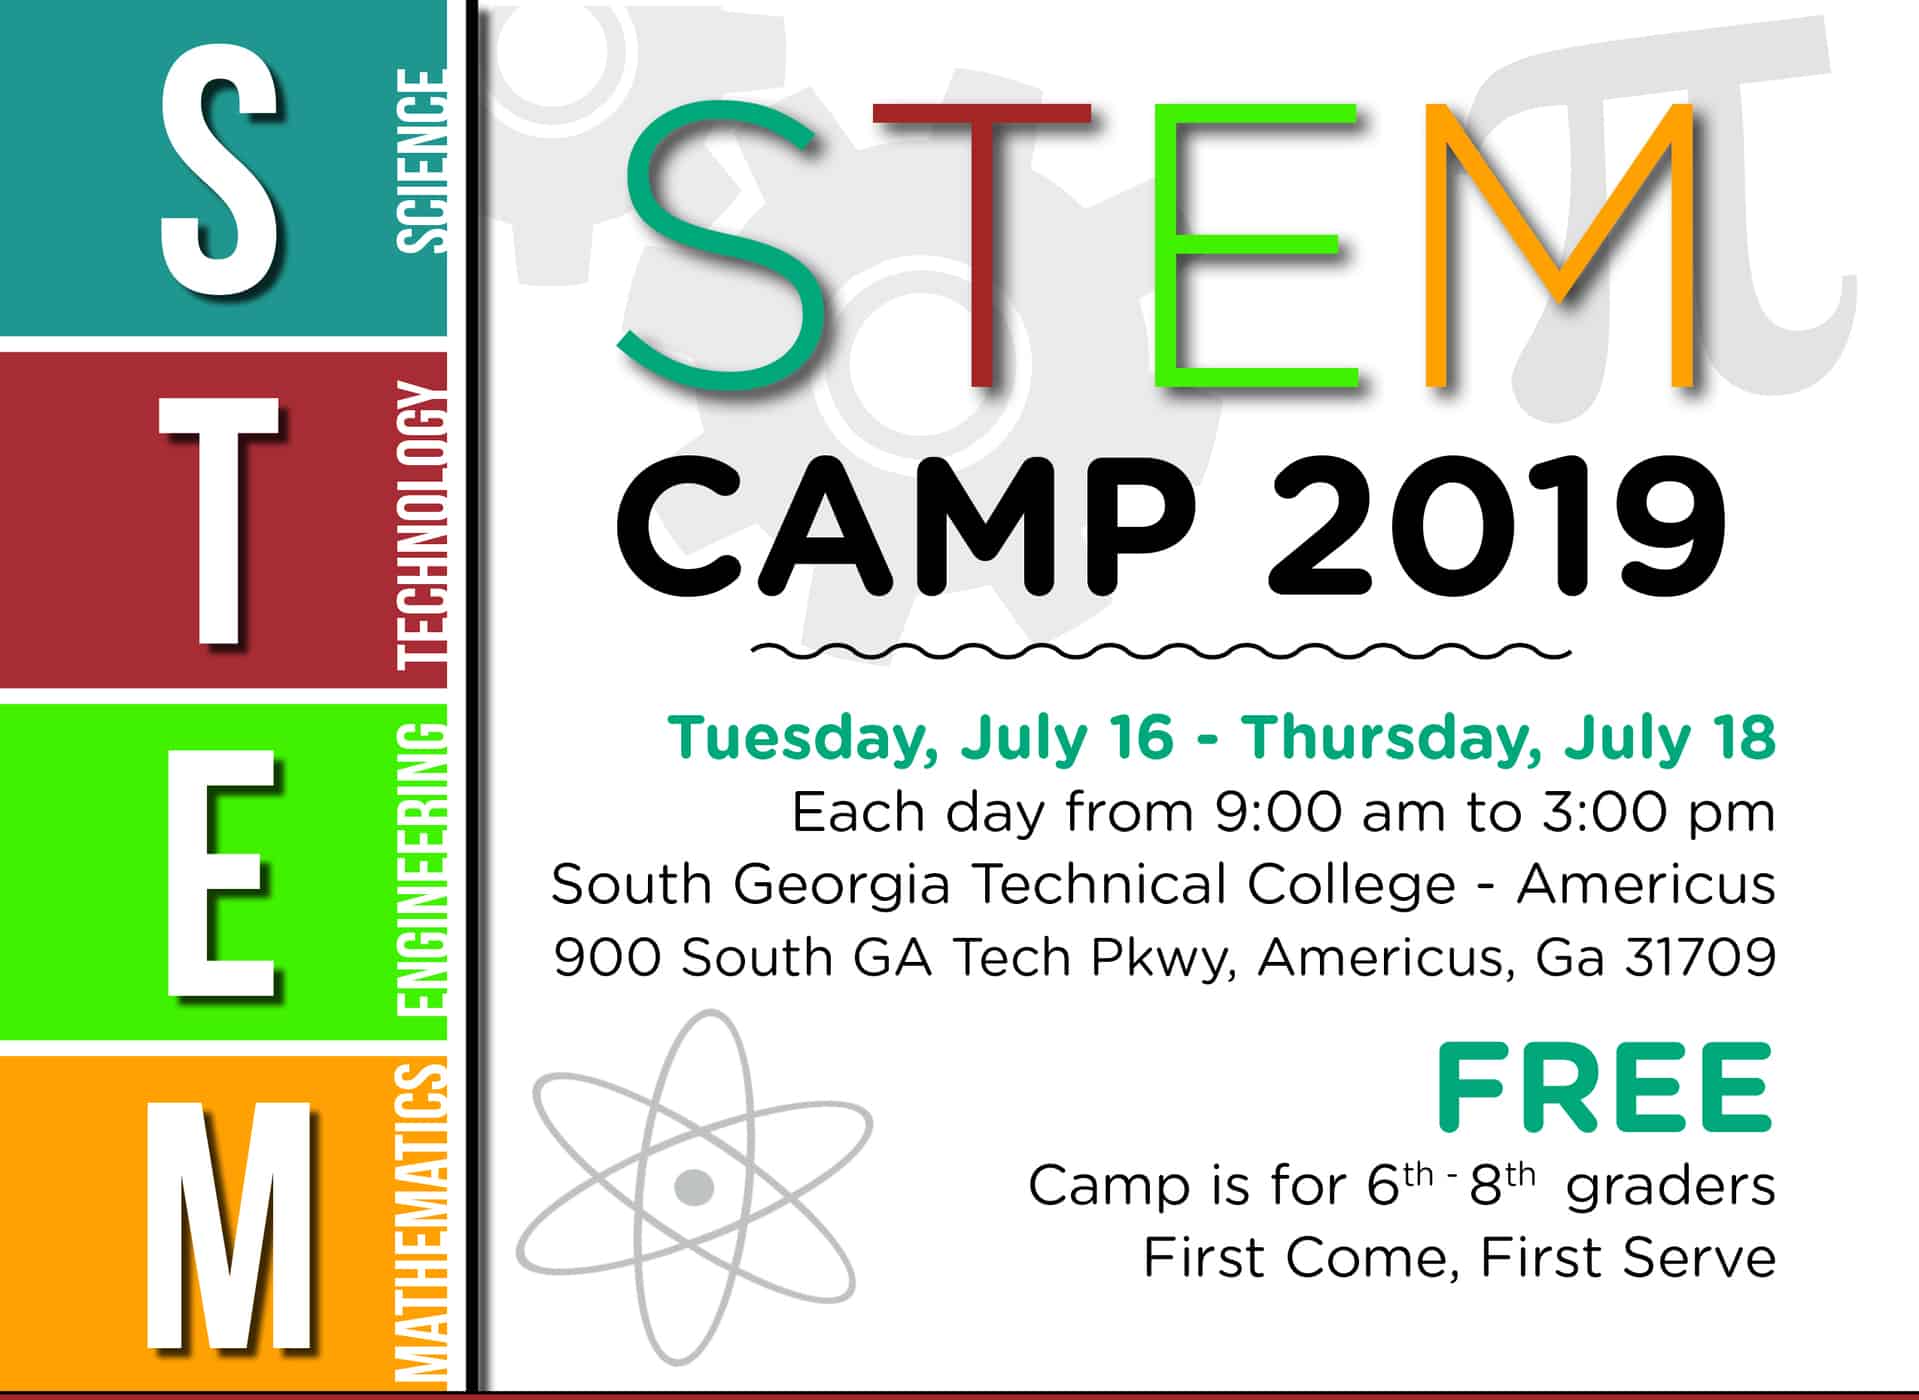 FREE SGTC STEM Camp set for July 16th – 18th in Americus.